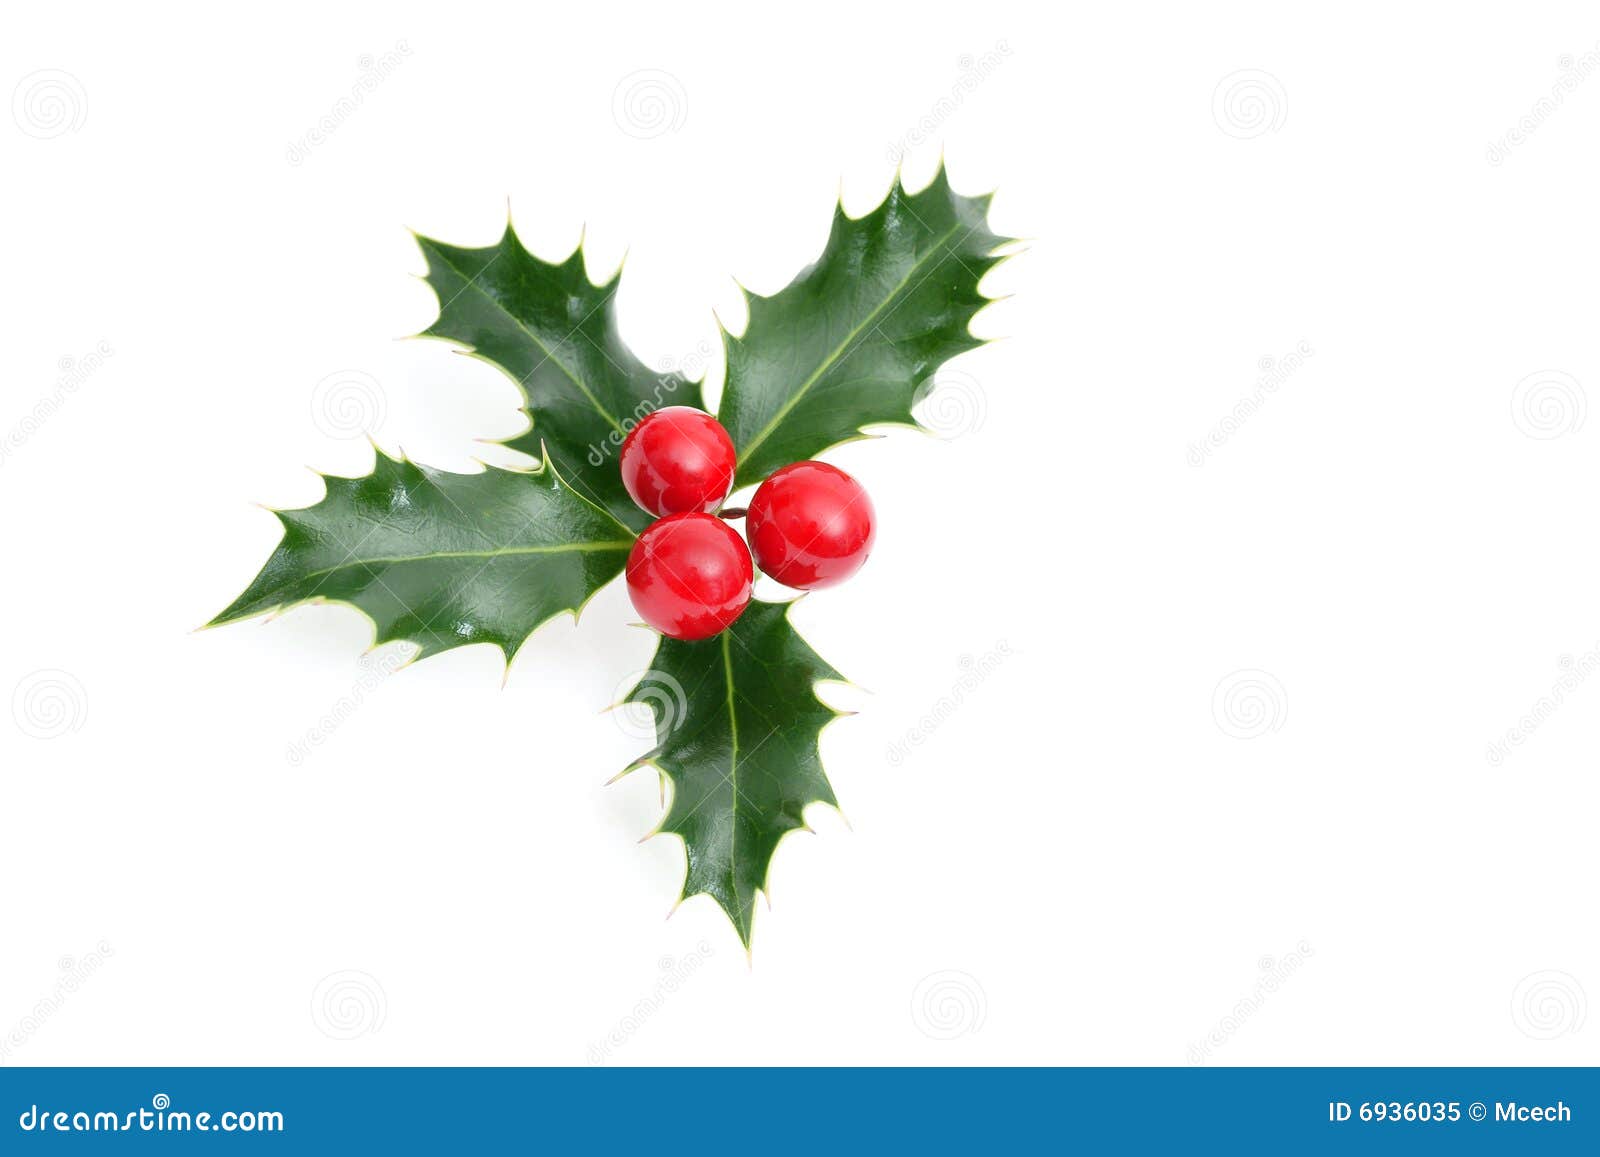 42+ Thousand Christmas Sprig Royalty-Free Images, Stock Photos & Pictures